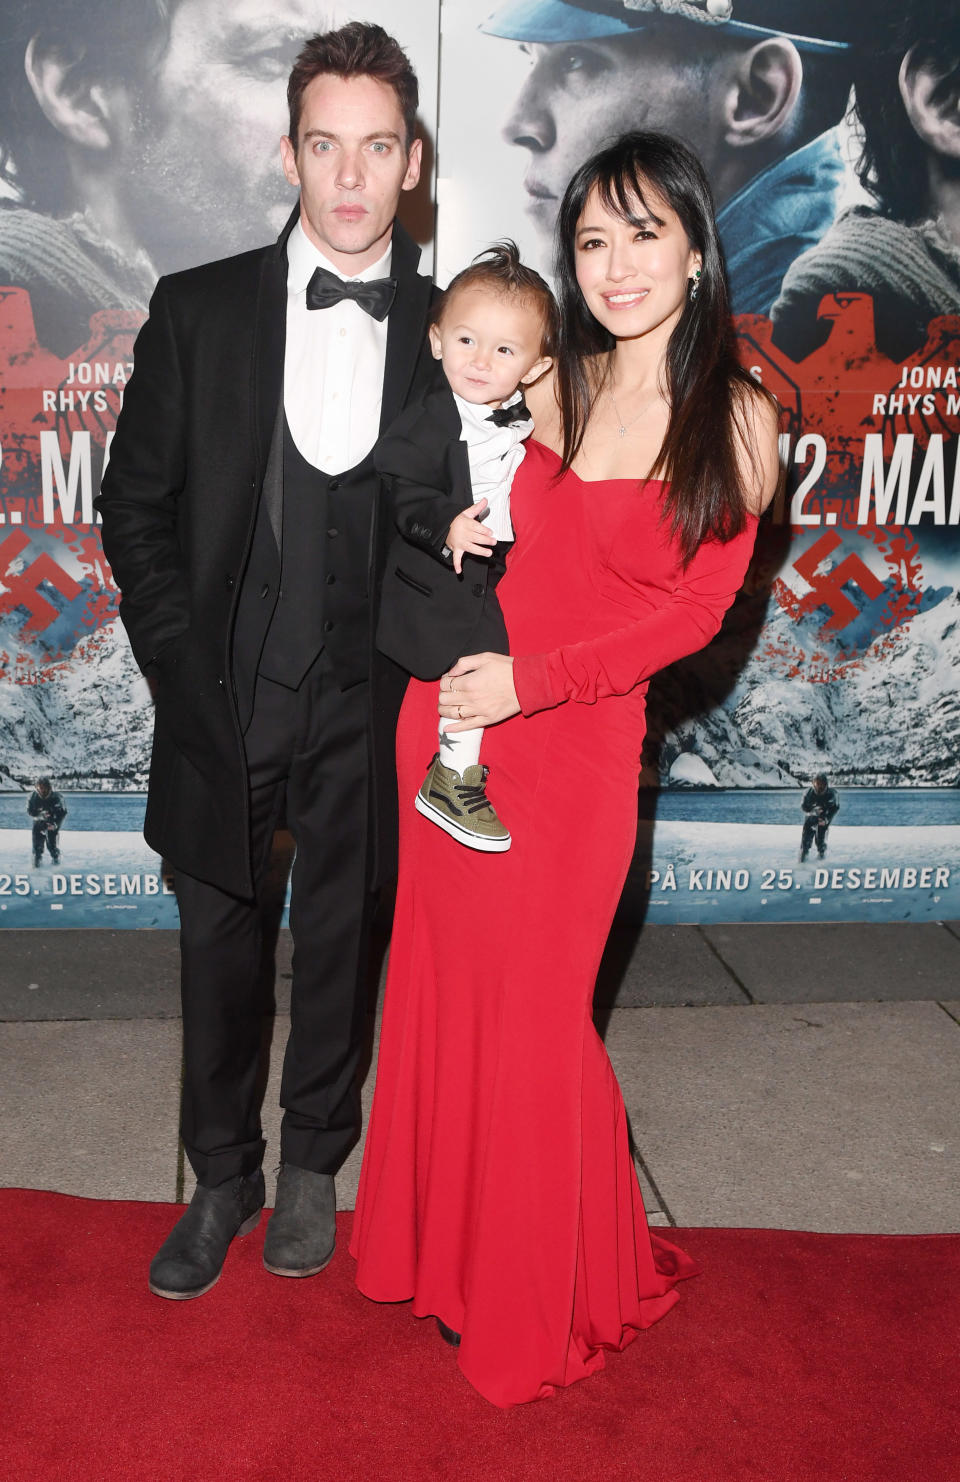 Jonathan Rhys Meyers with wife Mara and son Wolf attend the premiere of The 12th Man in Fredrikstad, Norway.(Getty)